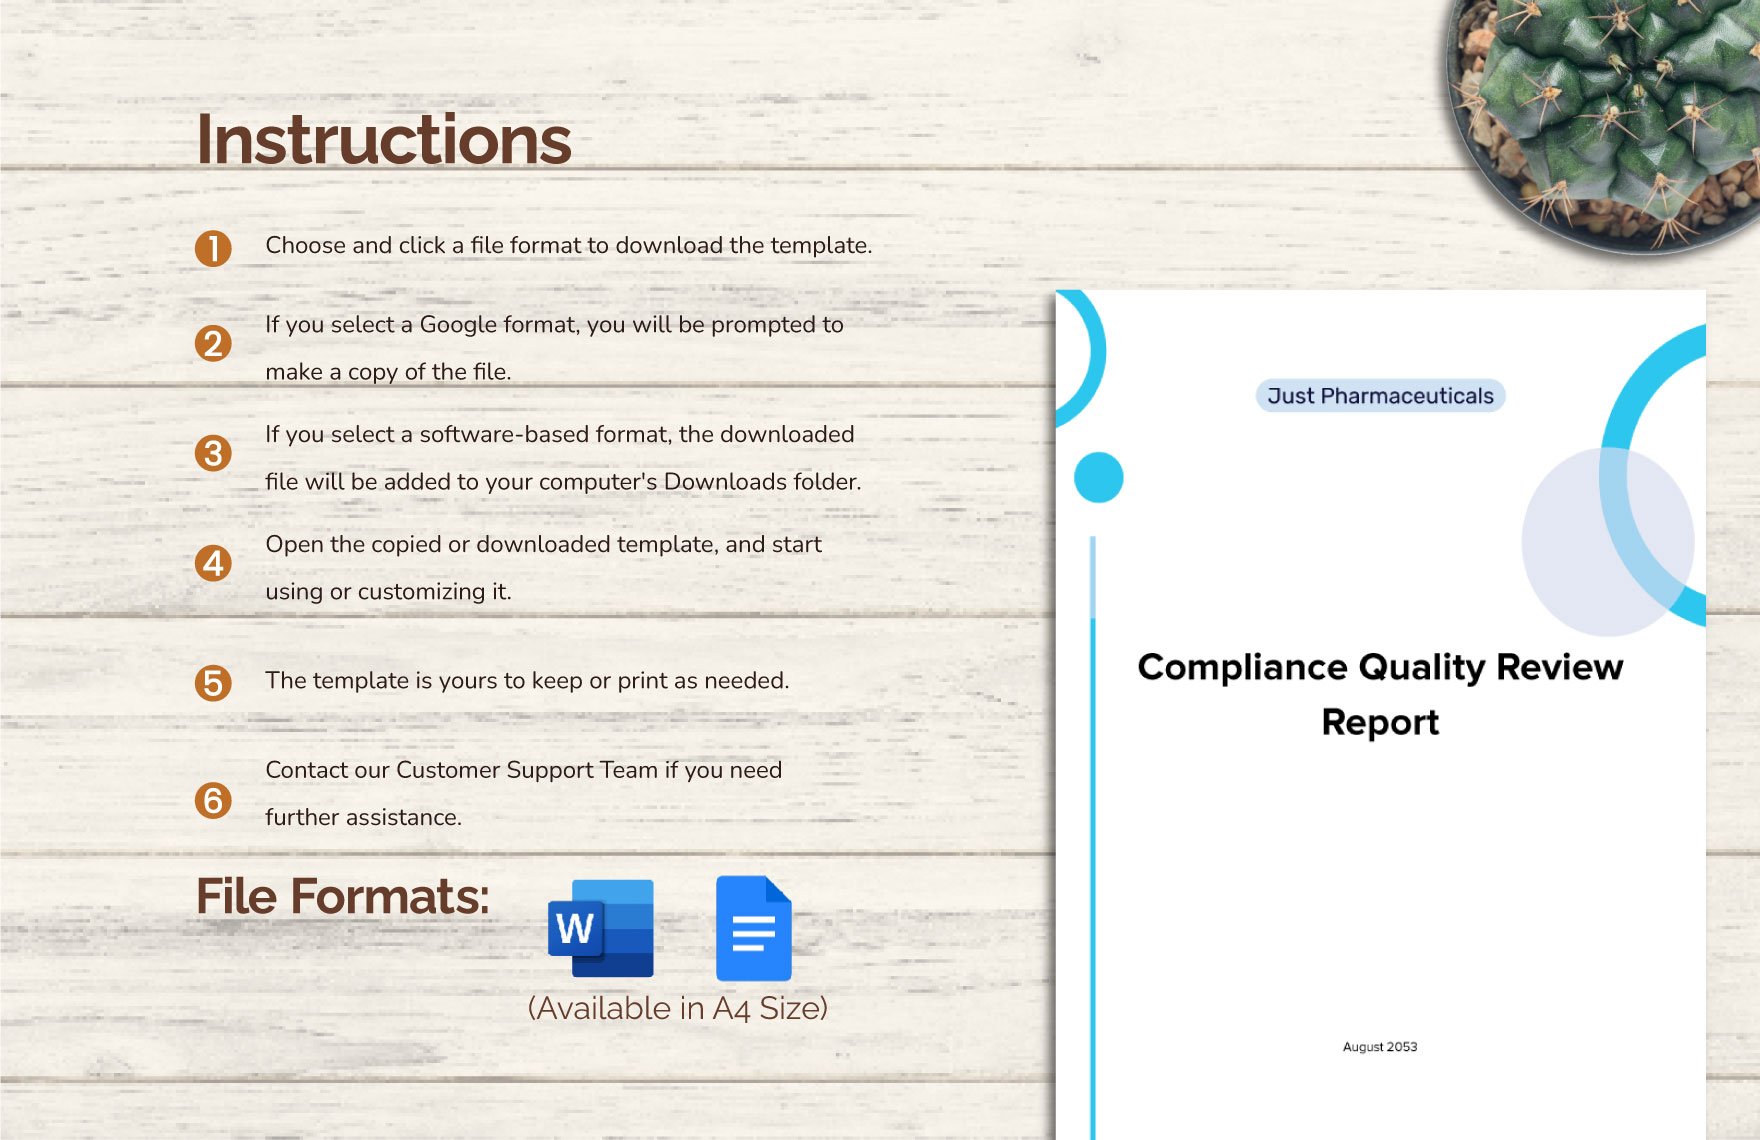 Compliance Quality Review Report Template